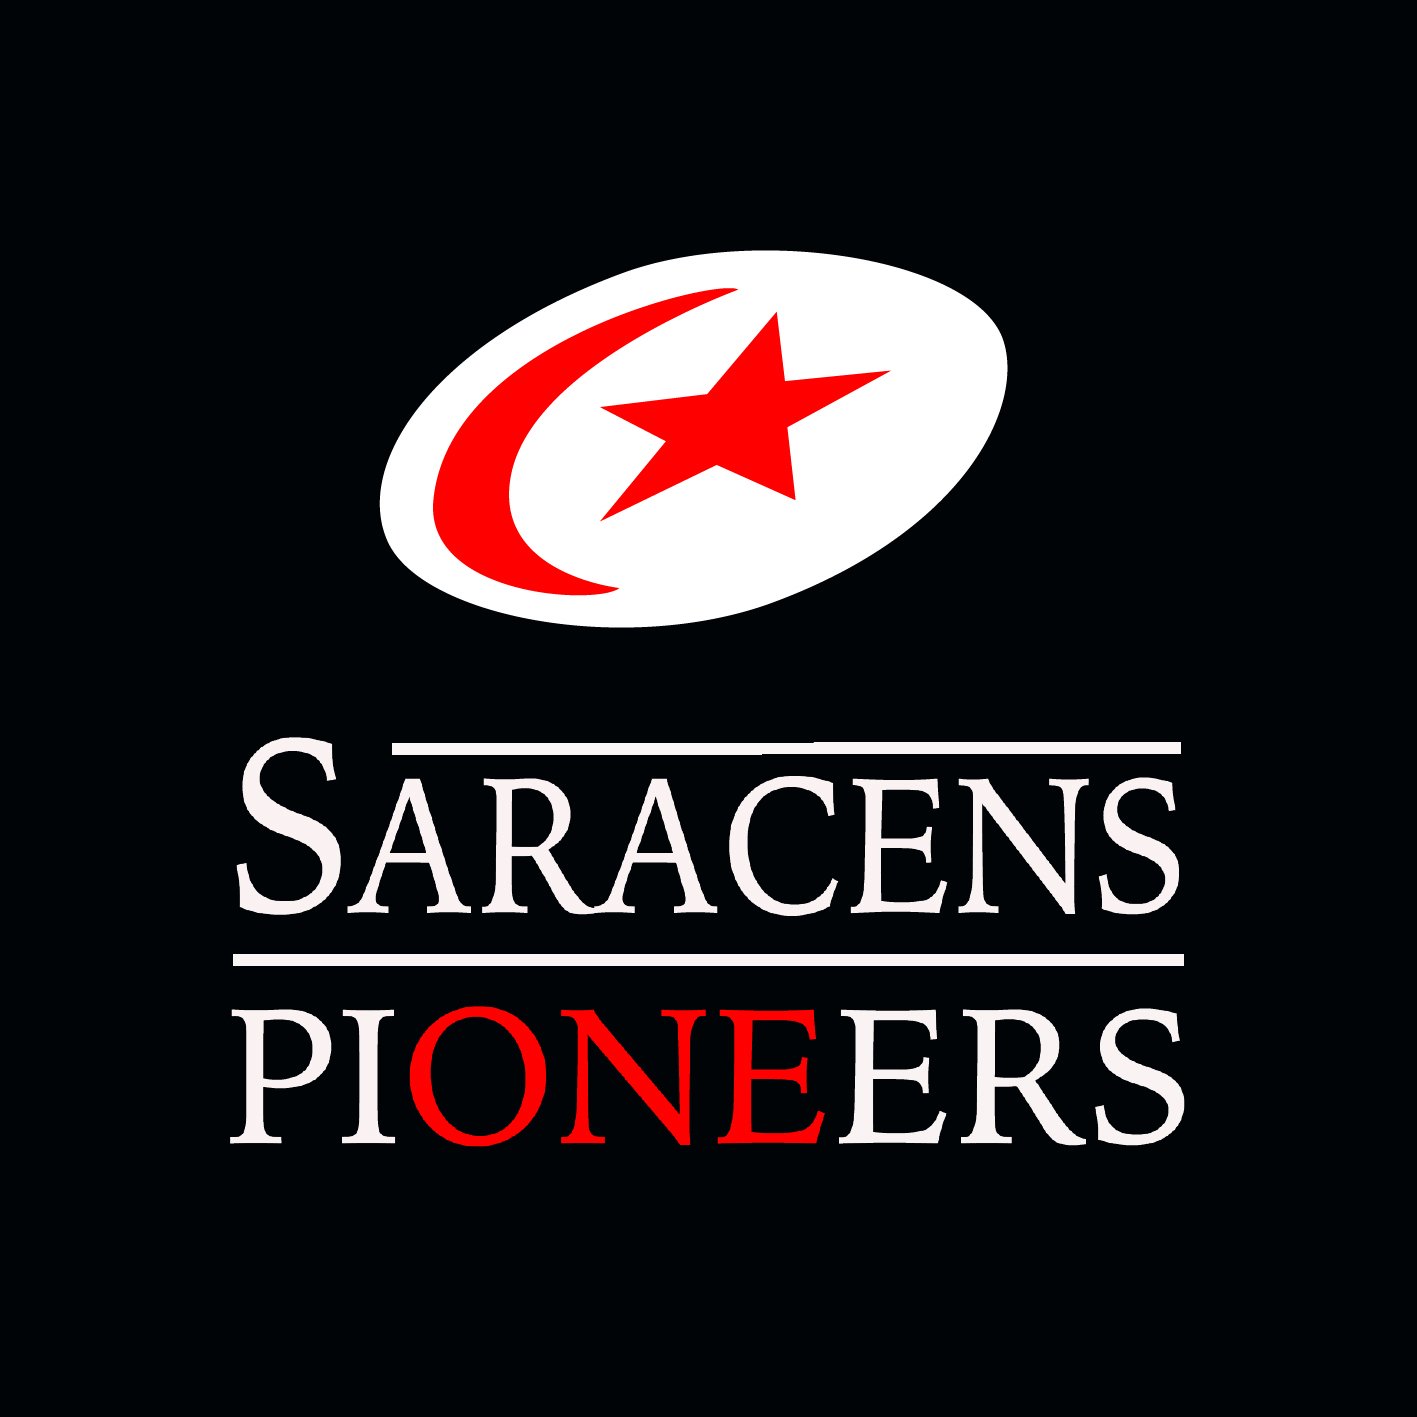 The Saracens Pioneers are the match day volunteers for Saracens Rugby Club, the smiling face of Allianz Park